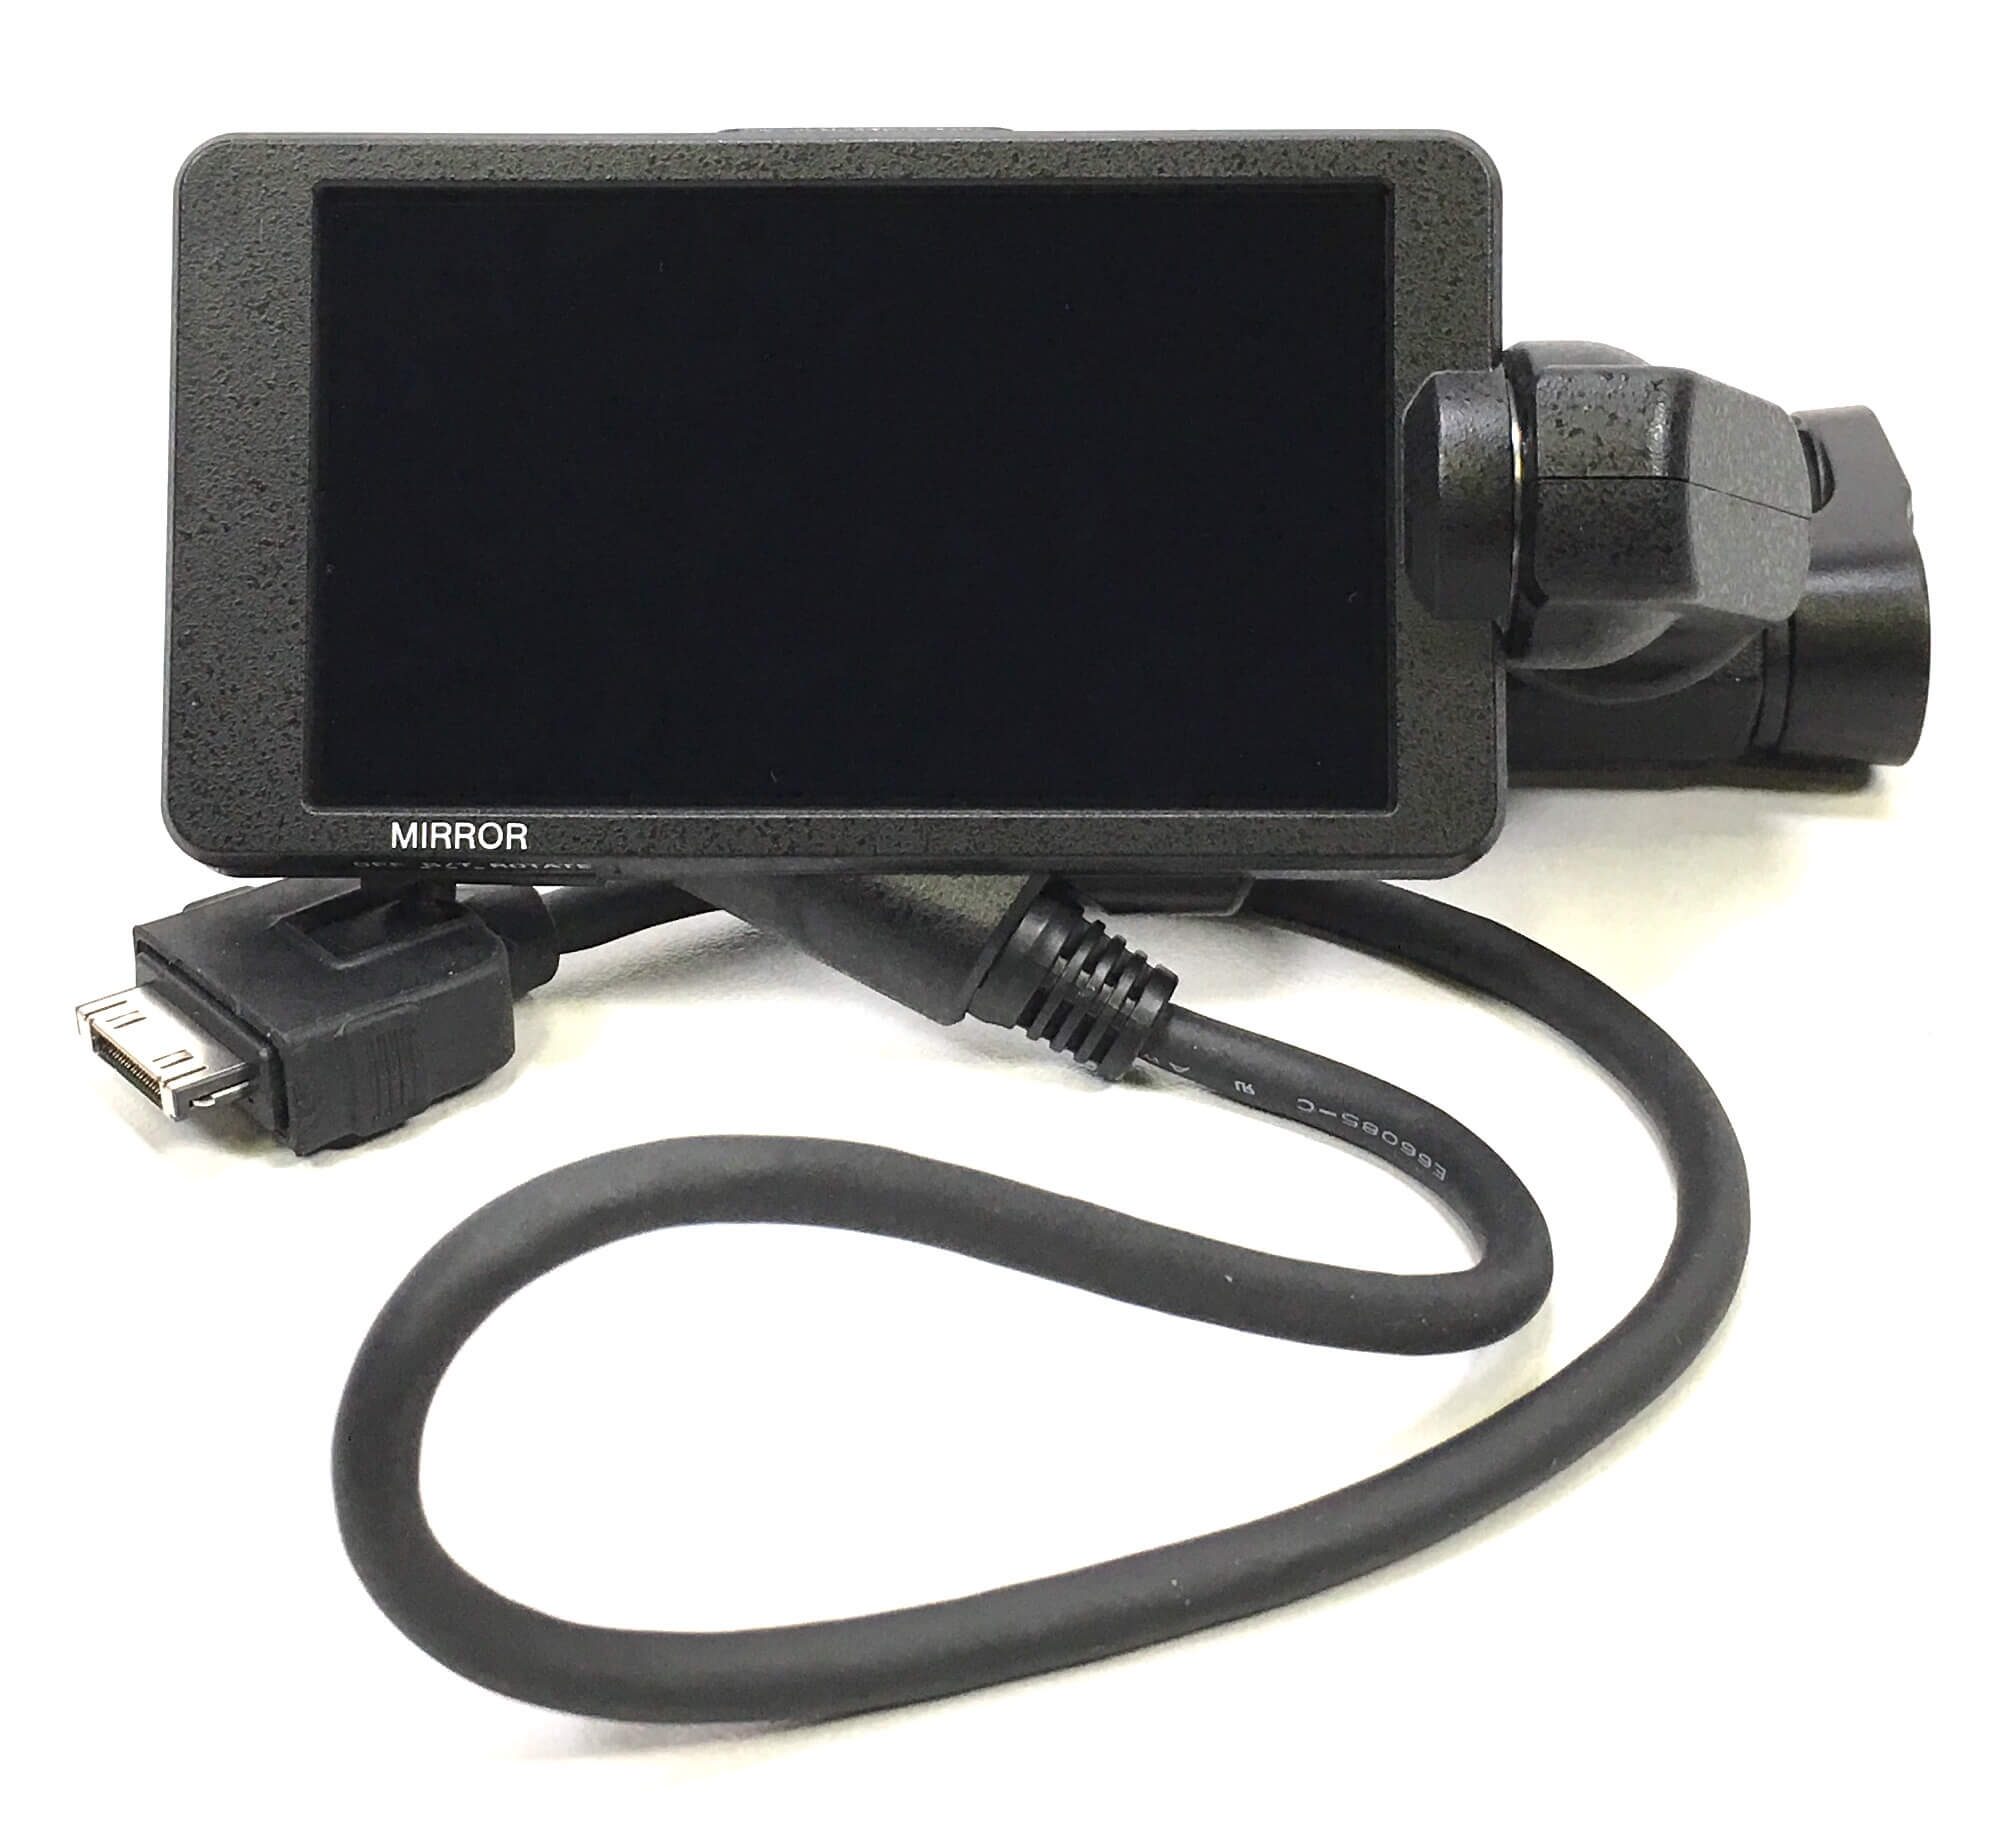 Original Sony PXW-FS5 LCD Block that fits on the the Sony PXW-FS5 camcorder. It is a genuine Sony part, sourced directly from Sony USA. Brand new factory fresh. Free Shipping.